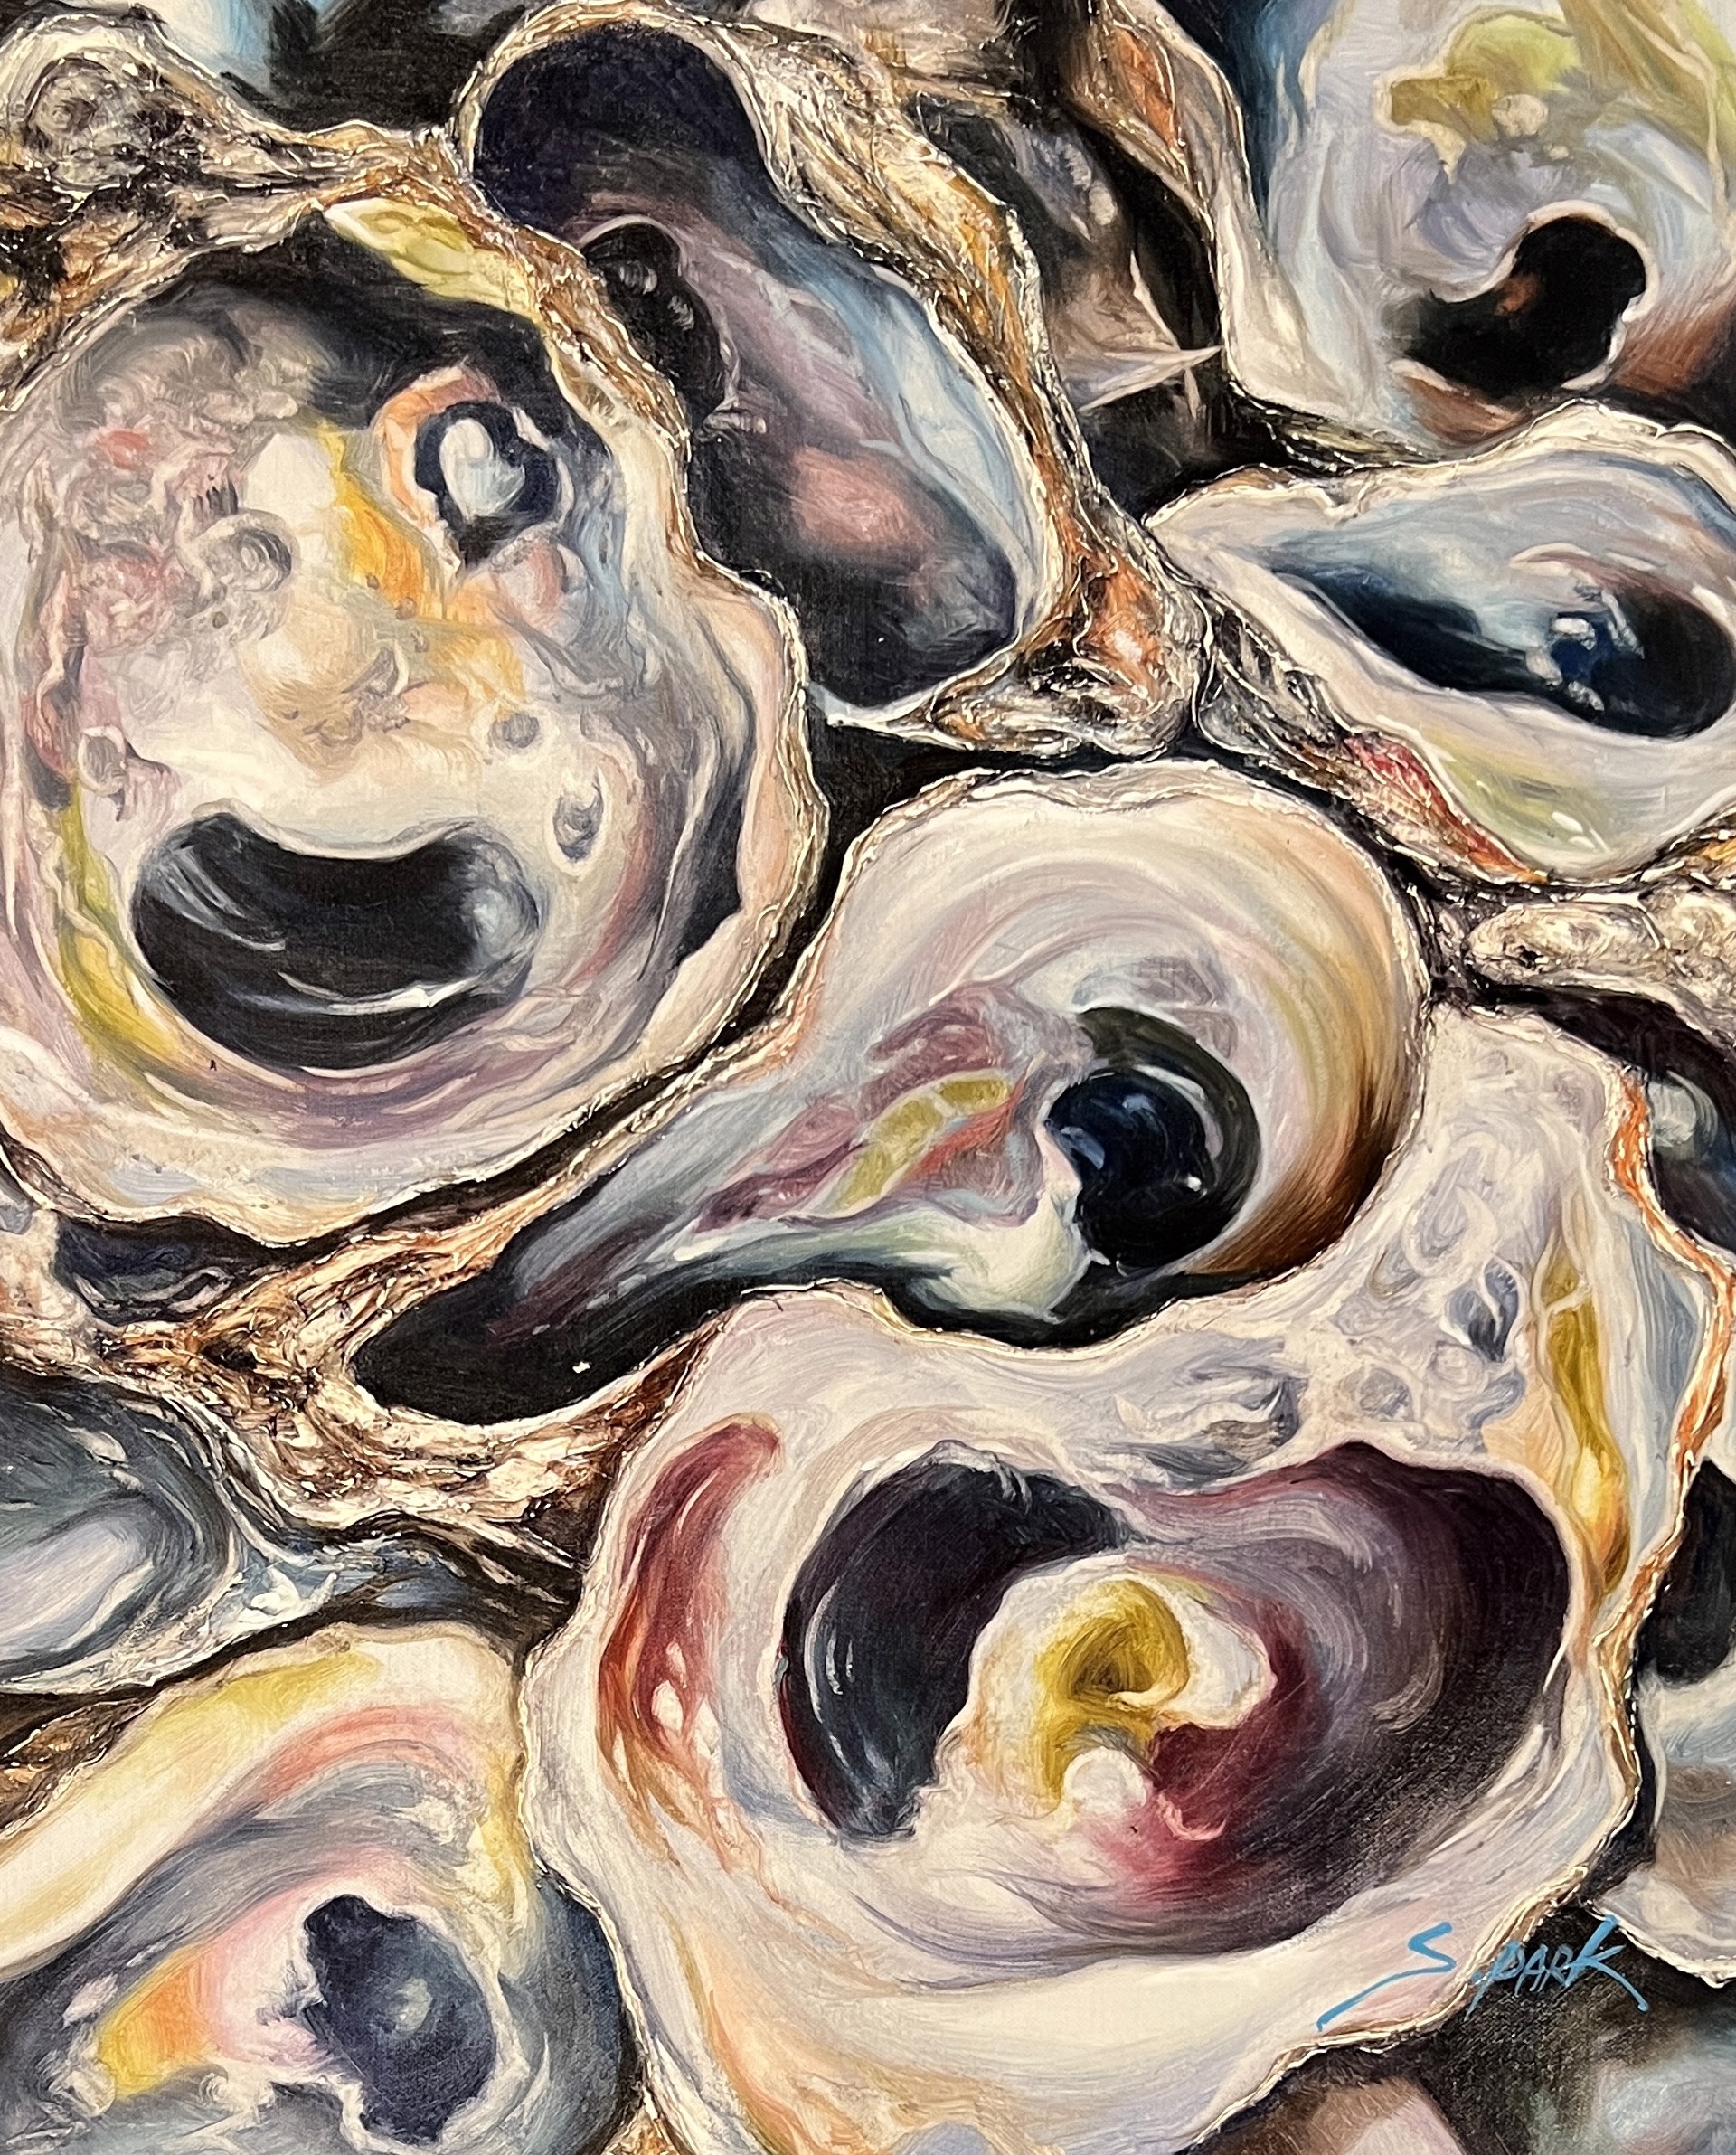 OYSTER SHELLS by S PARK